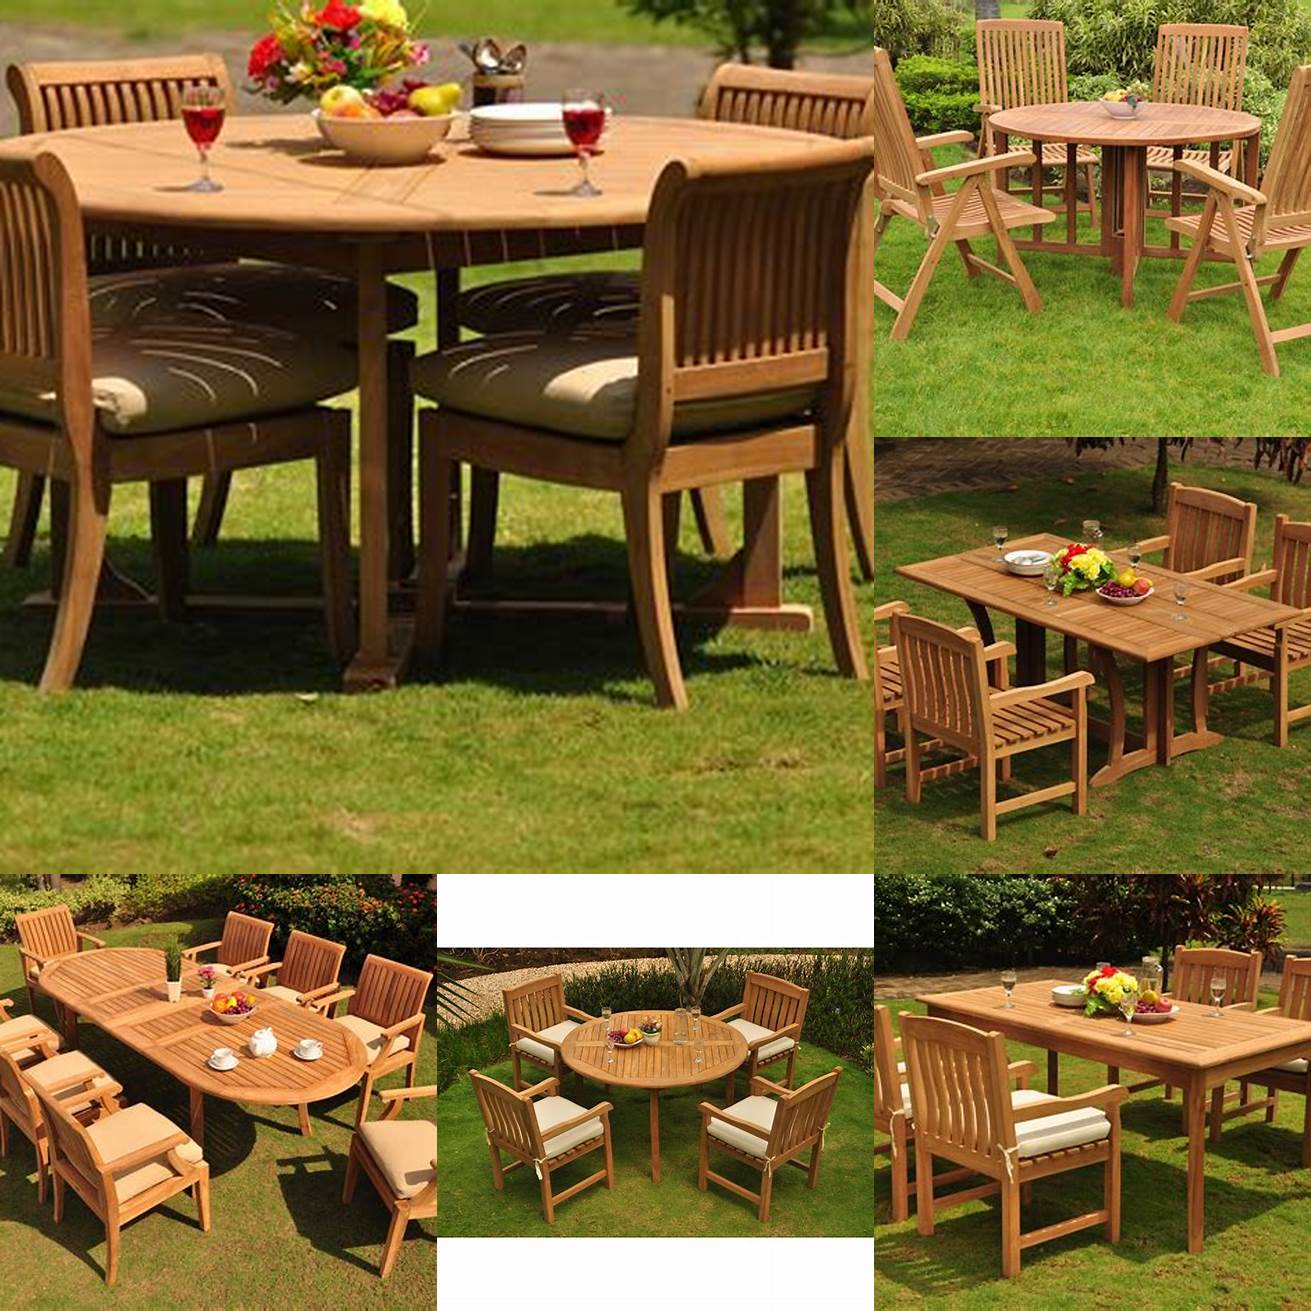 A teak outdoor table and chairs set